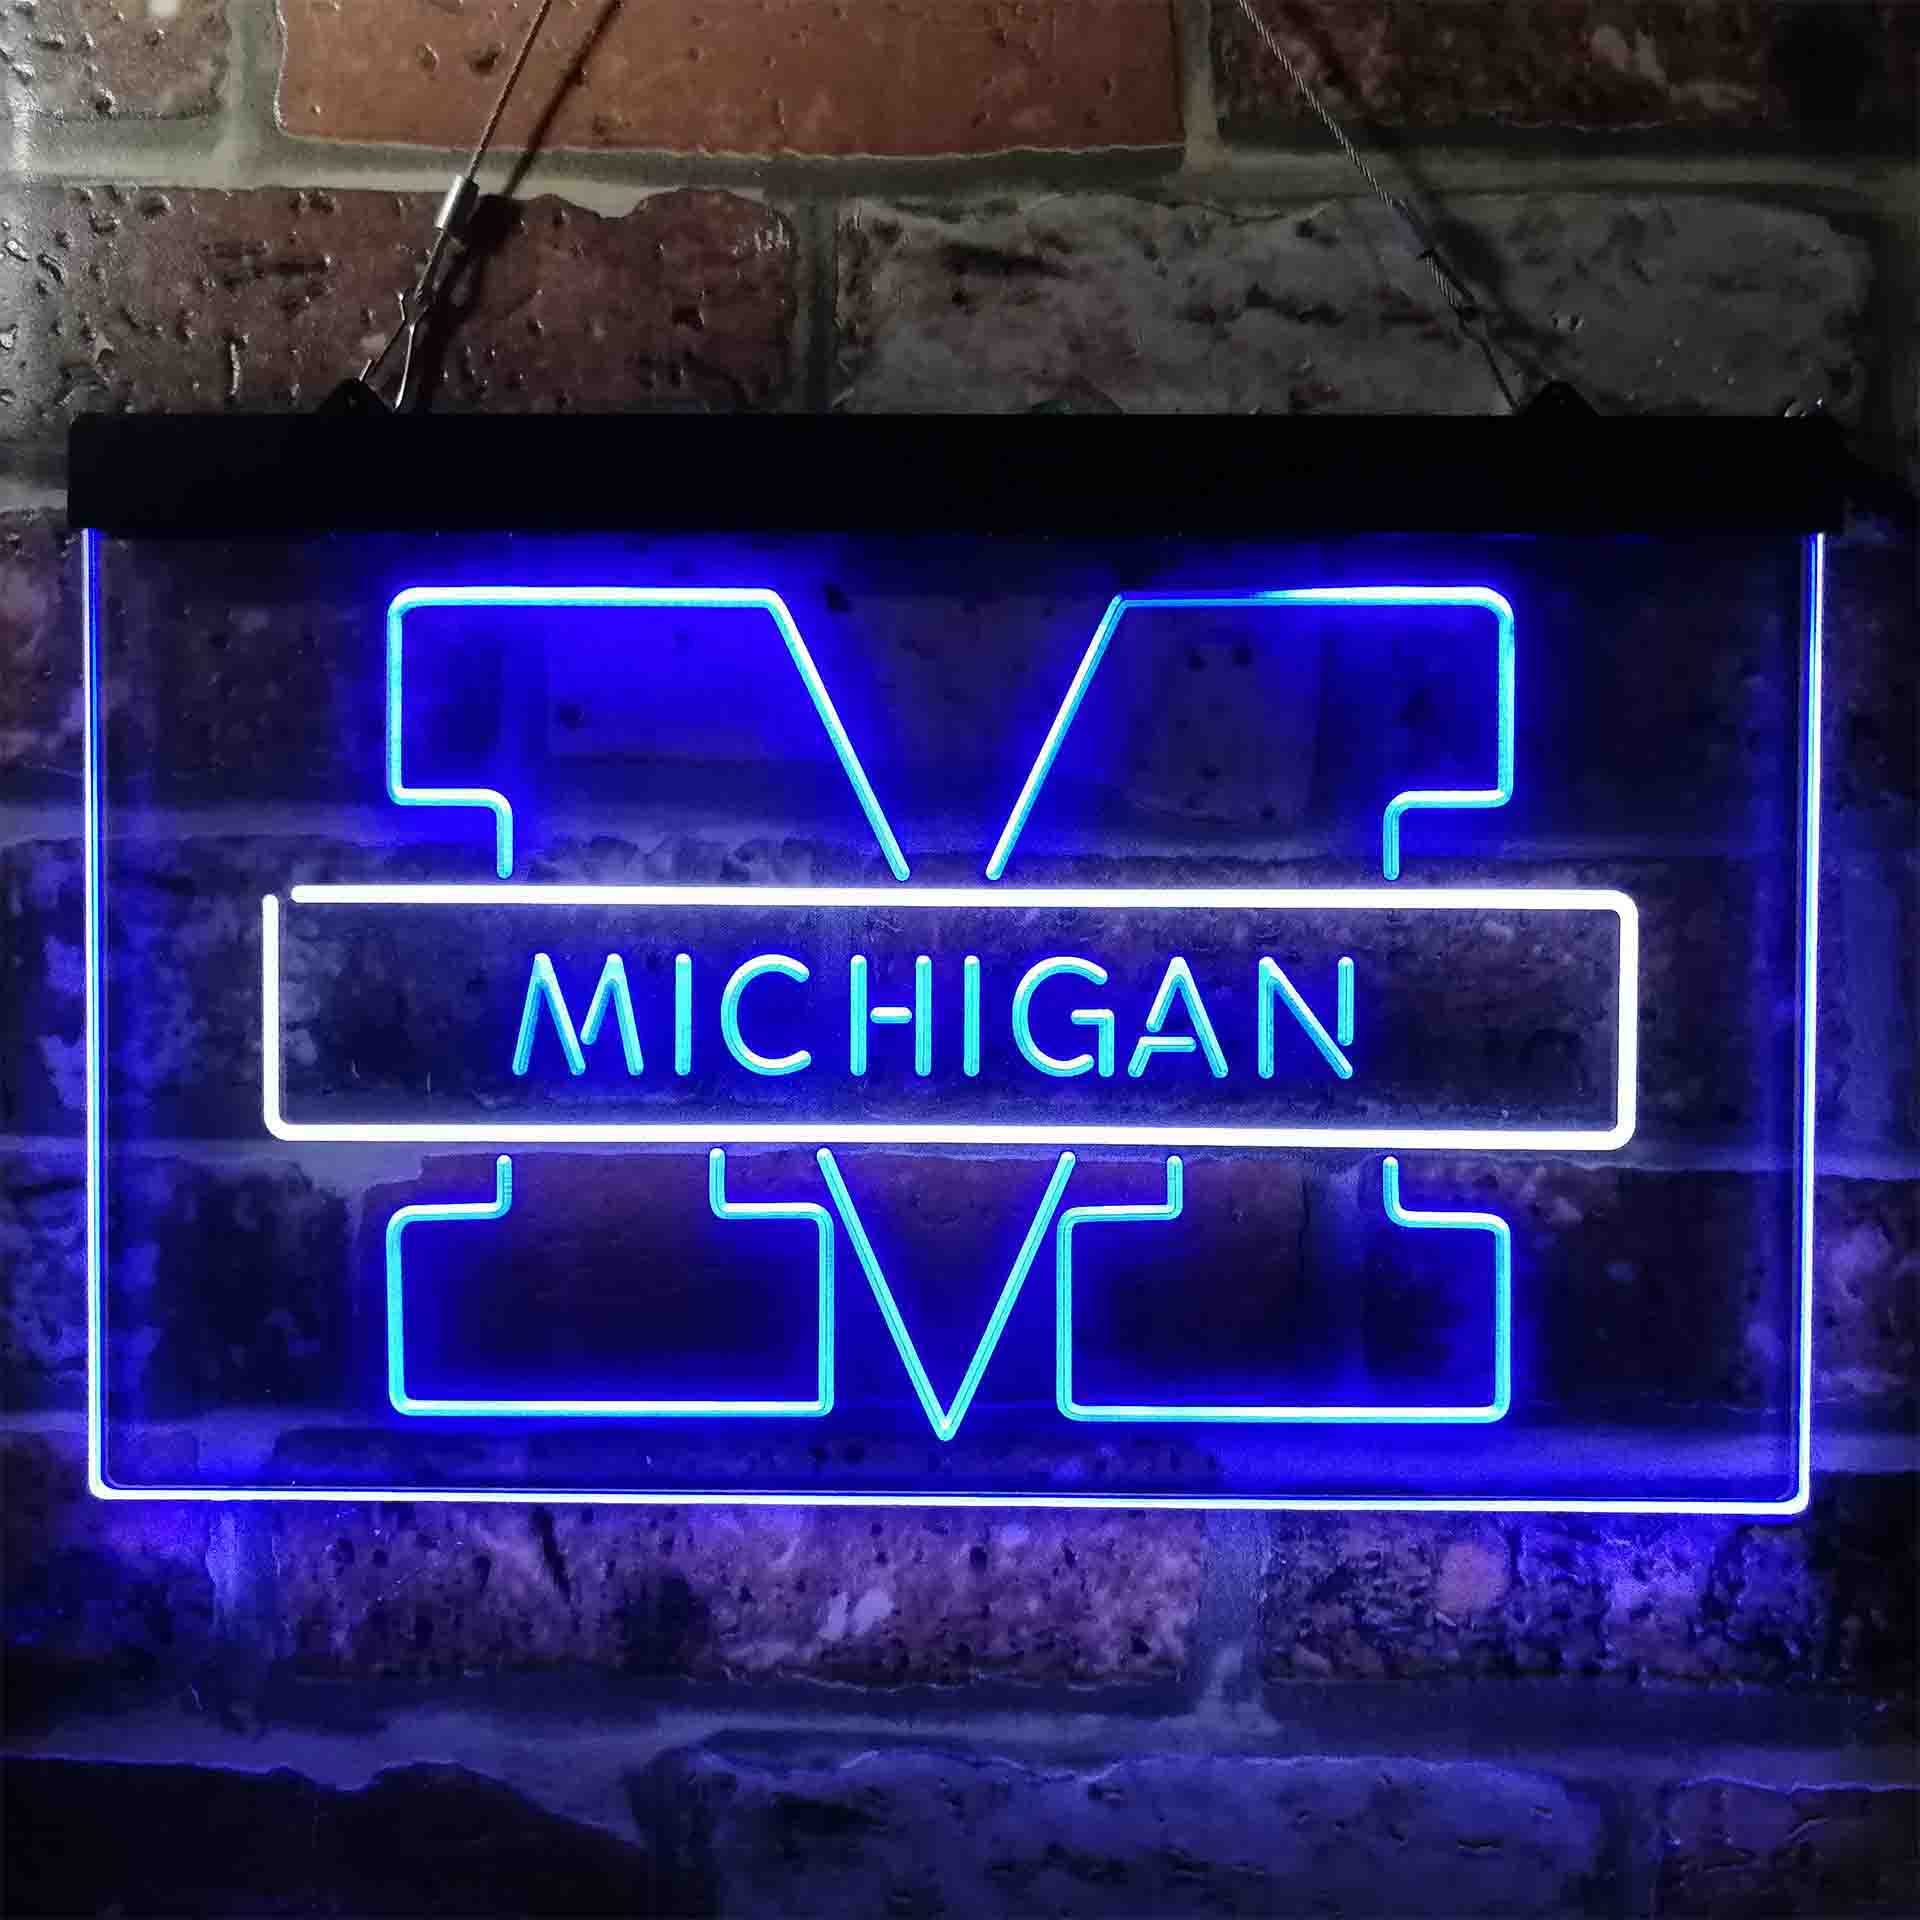 Michigans Sport League Team Wolverines Club LED Neon Sign